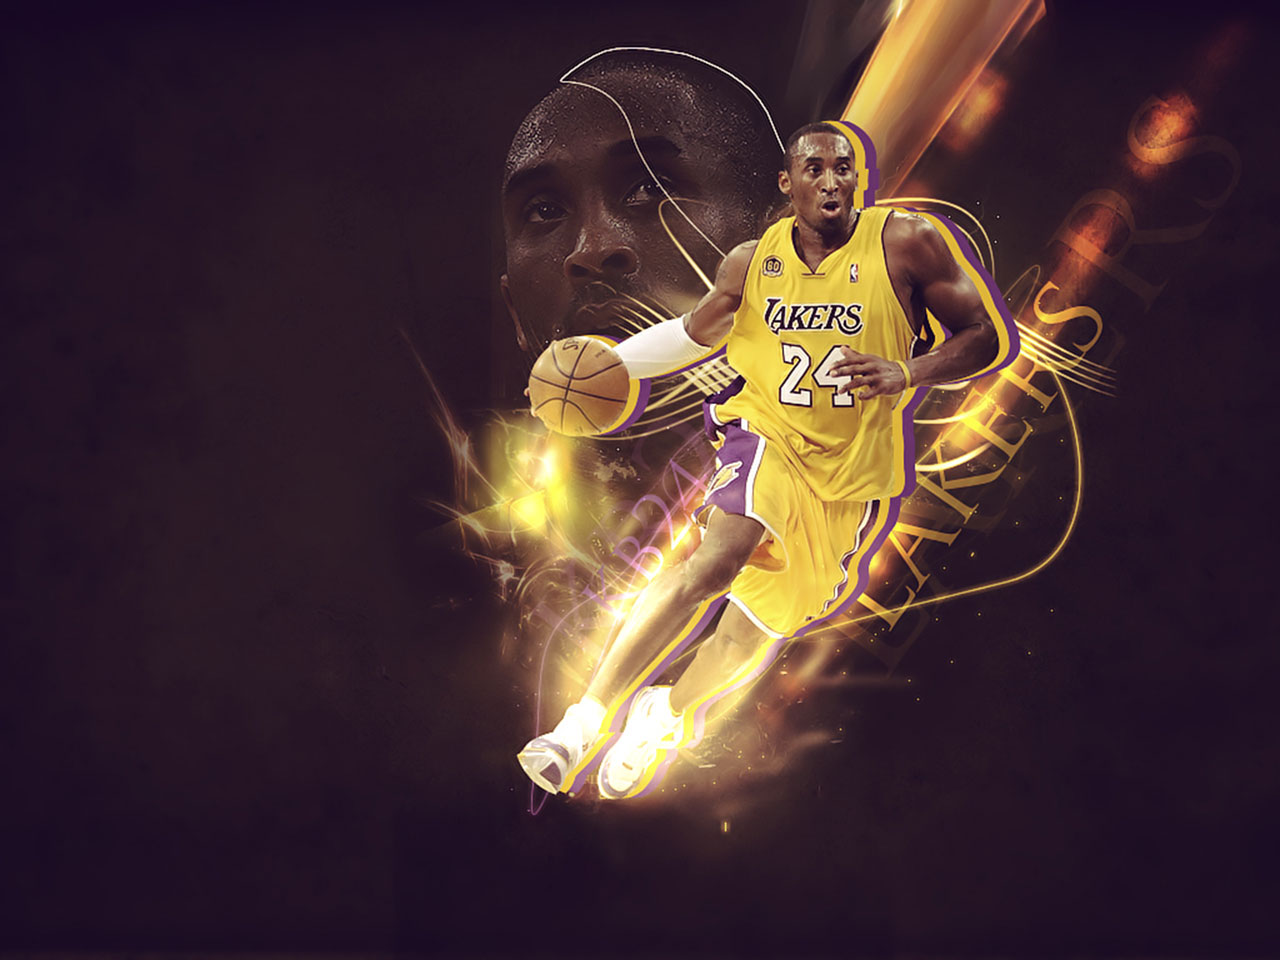  on all time NBA scorers ladder so i wanted to add wallpaper of him, 